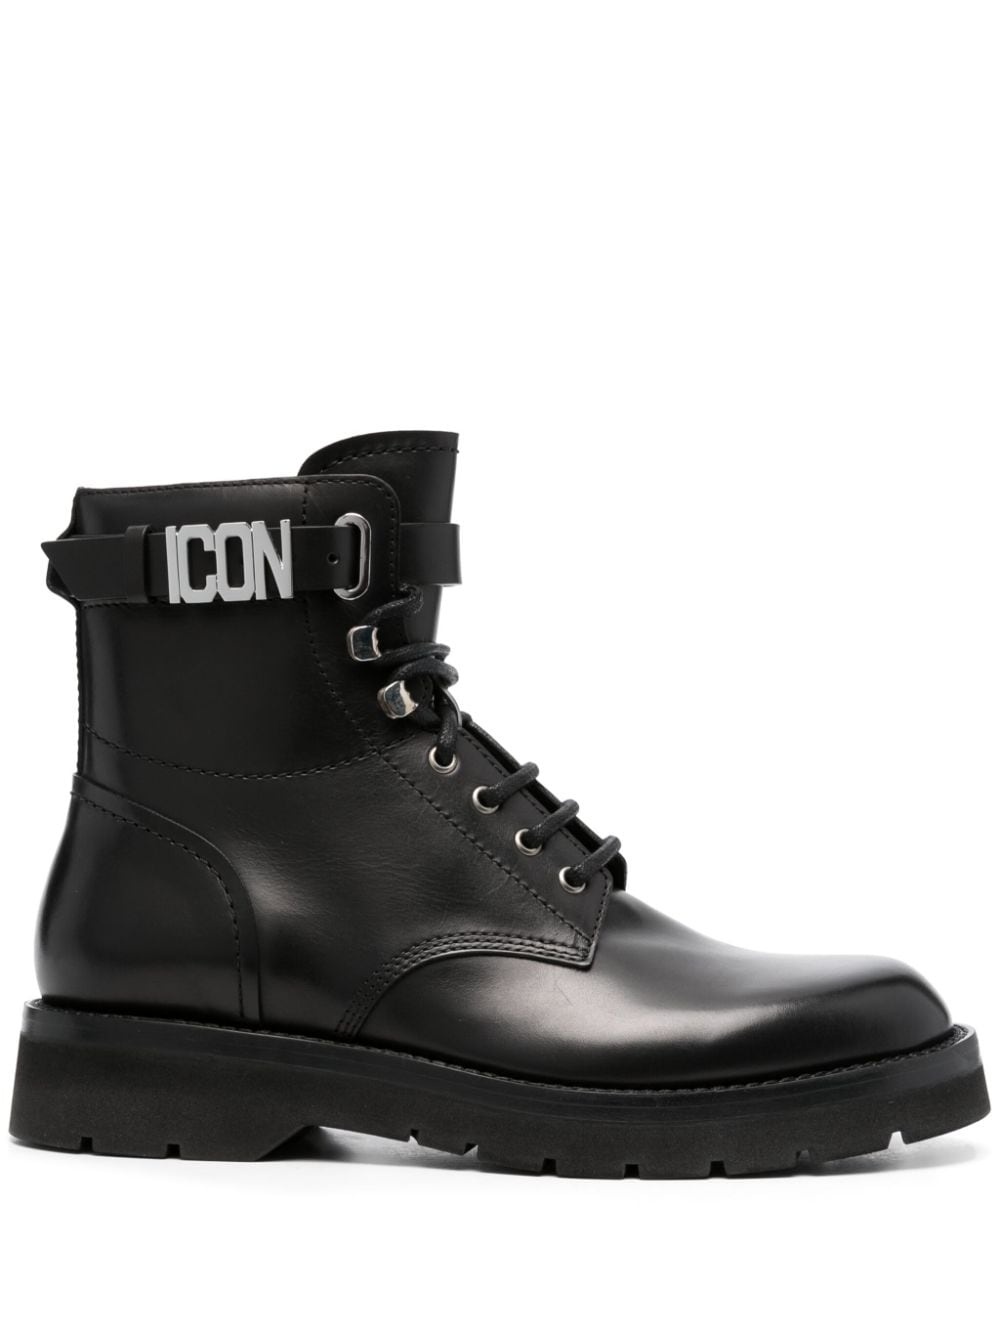 Icon leather combat boots - 1